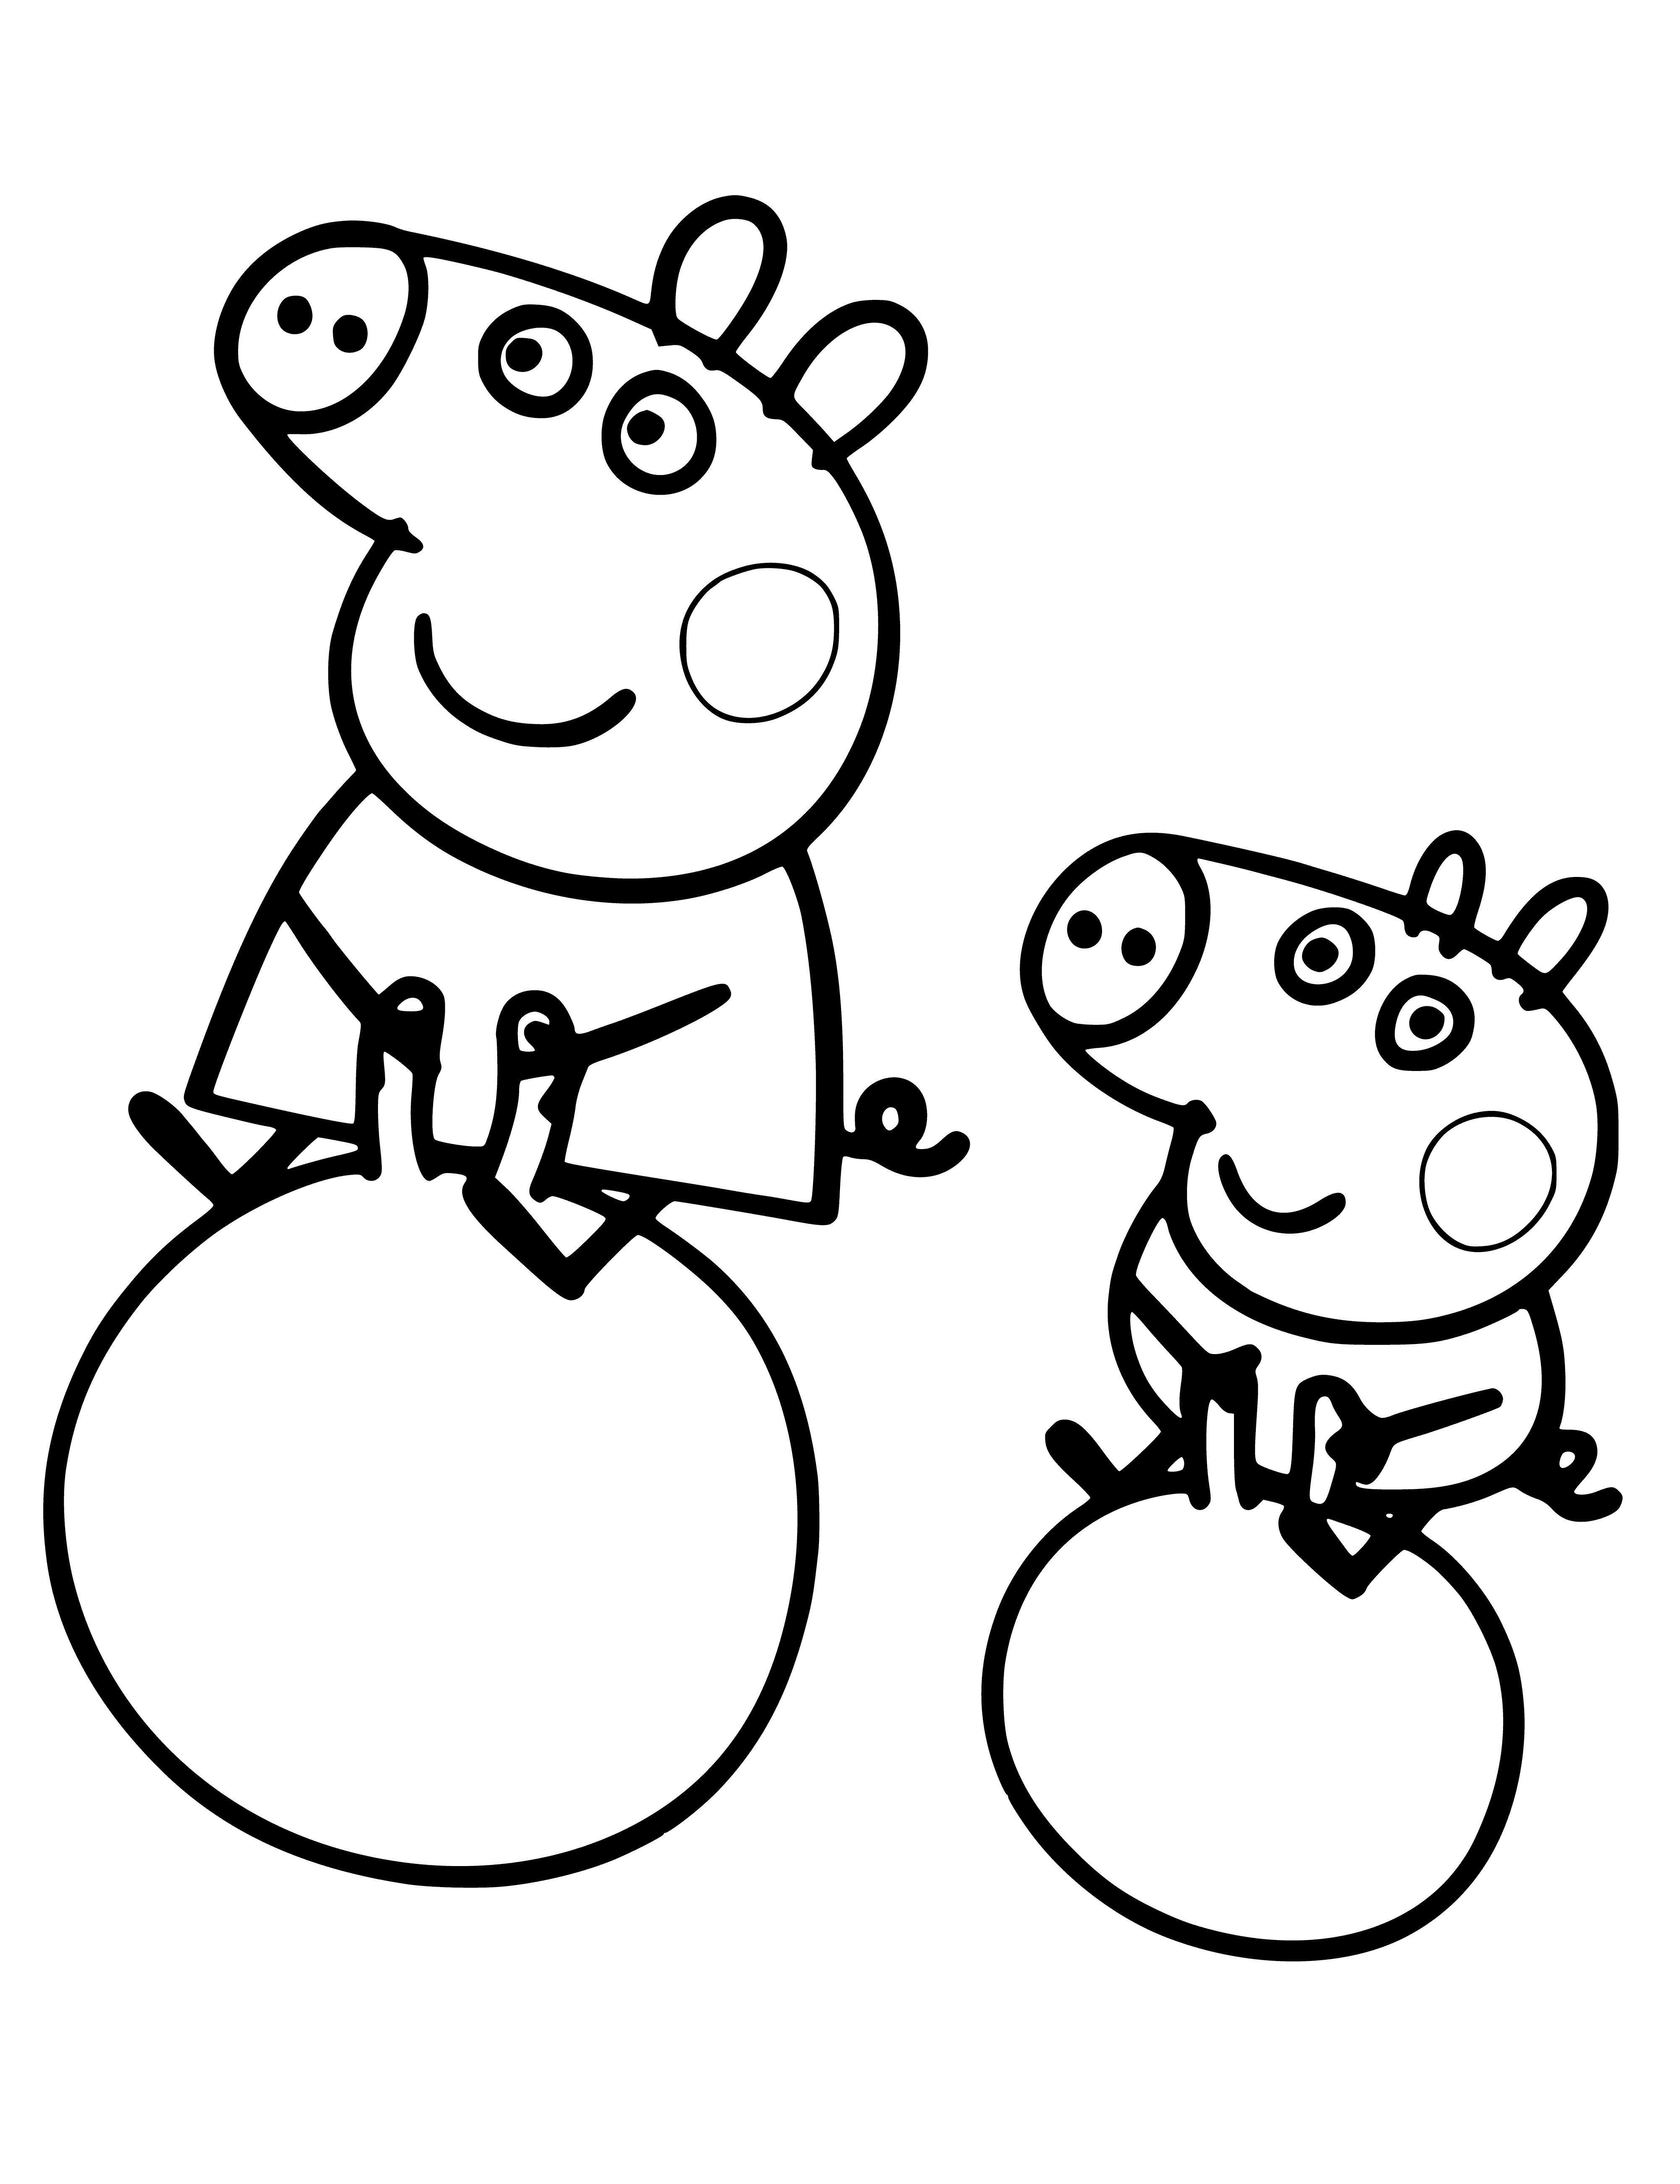 coloring page: Two people sit on logs. A girl with brown hair wears pink & blue, & a boy blond blue & brown. Both are barefoot.